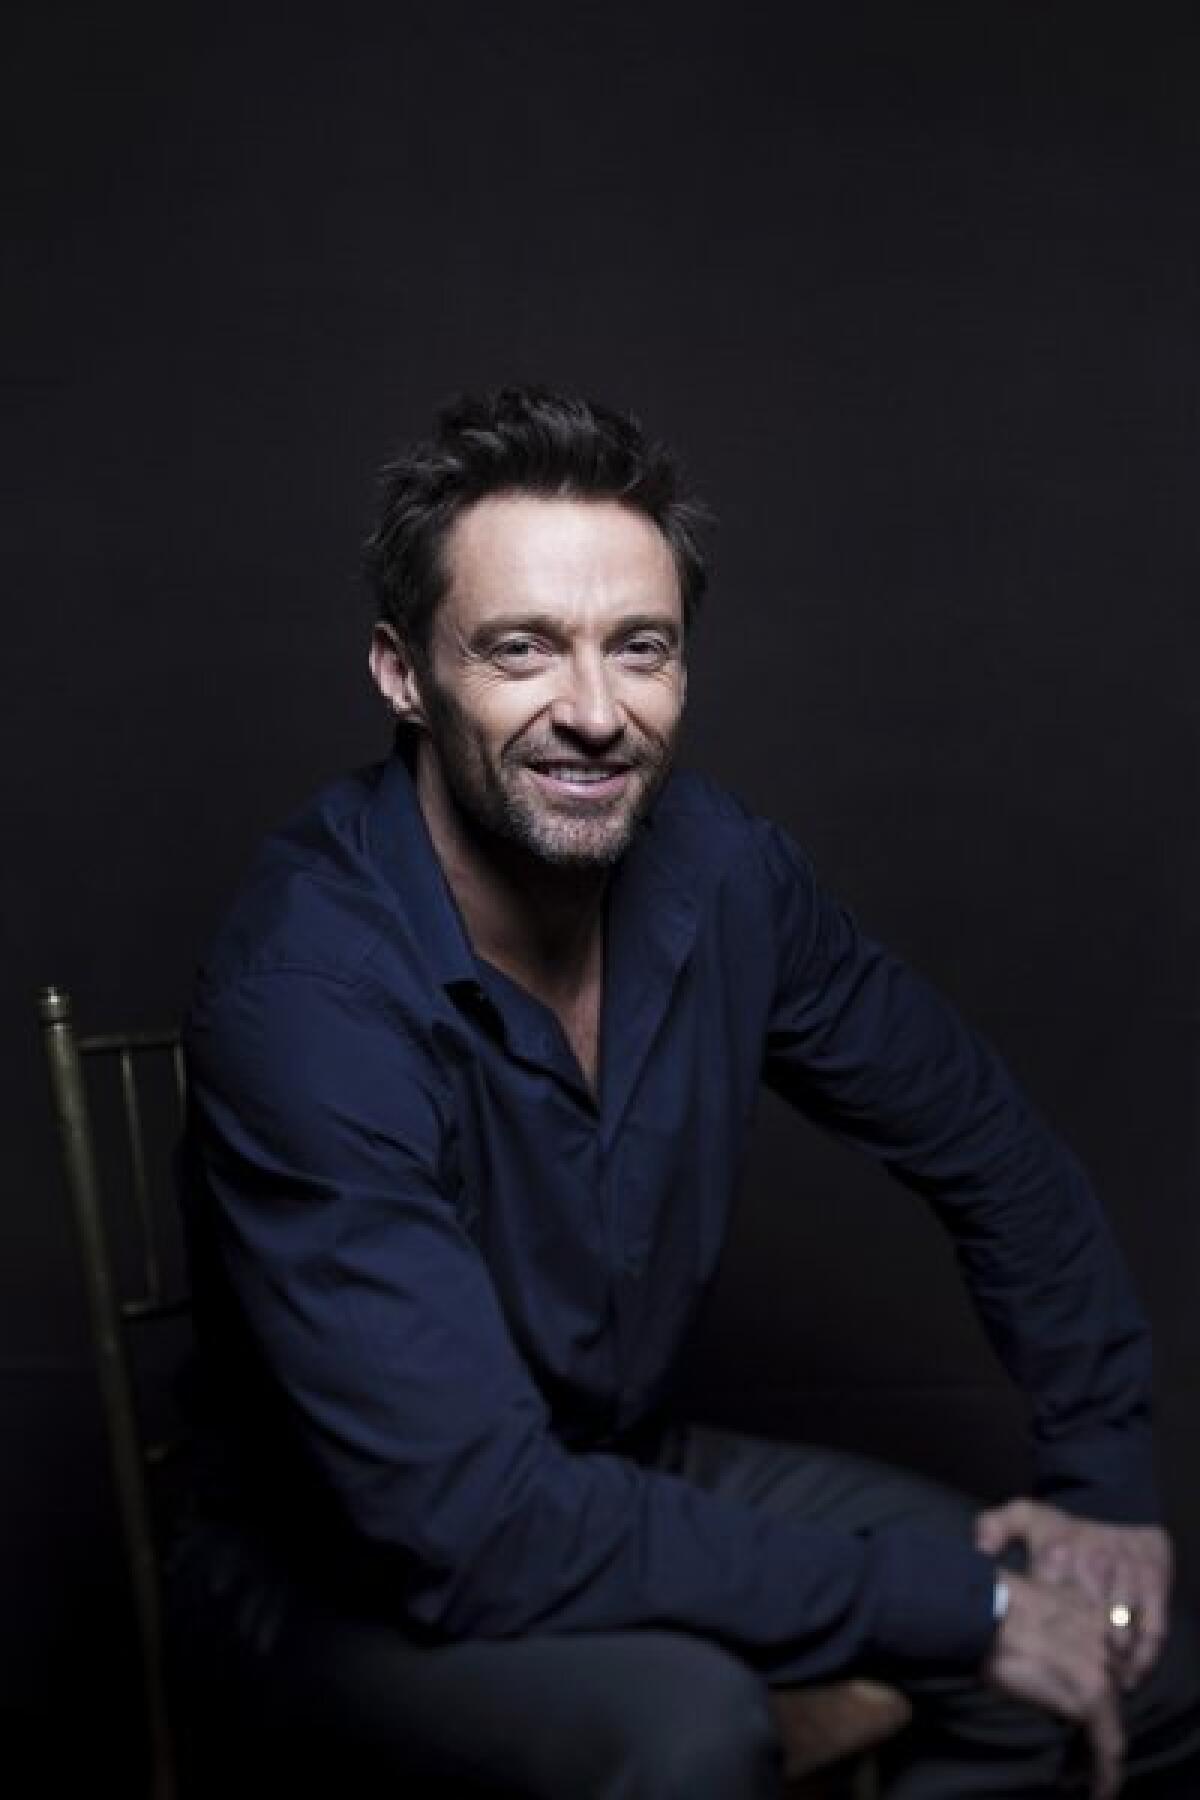 Hugh Jackman, who recently performed his new variety show at the Hollywood Bowl